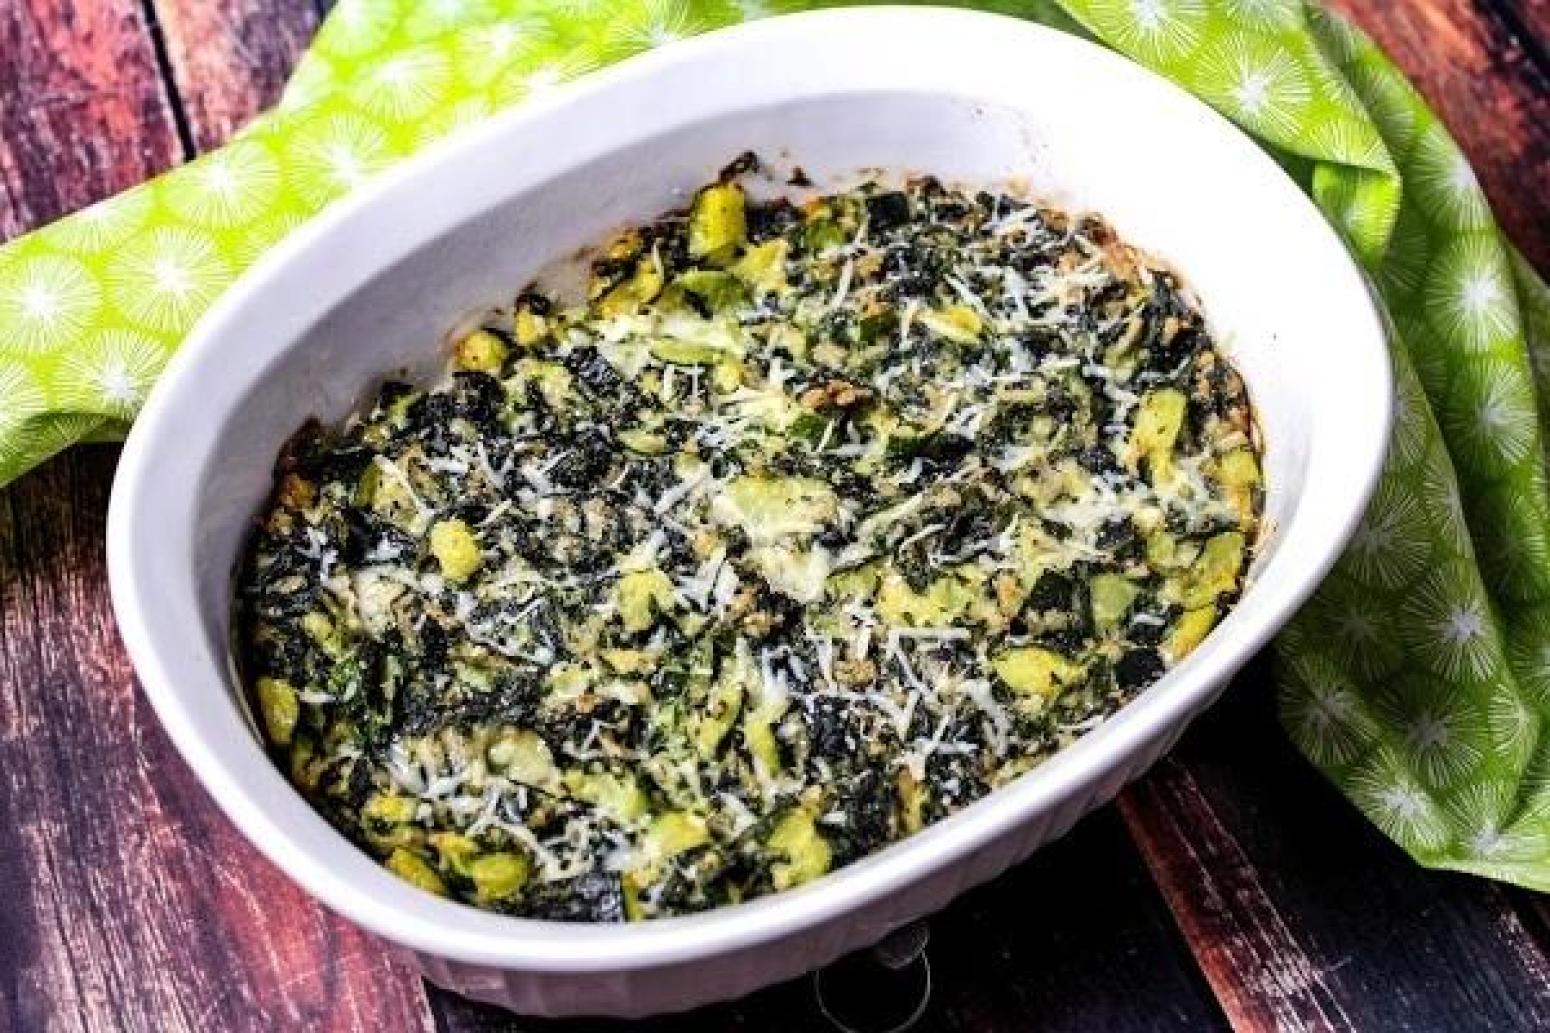 Spinach and Zucchini Bake